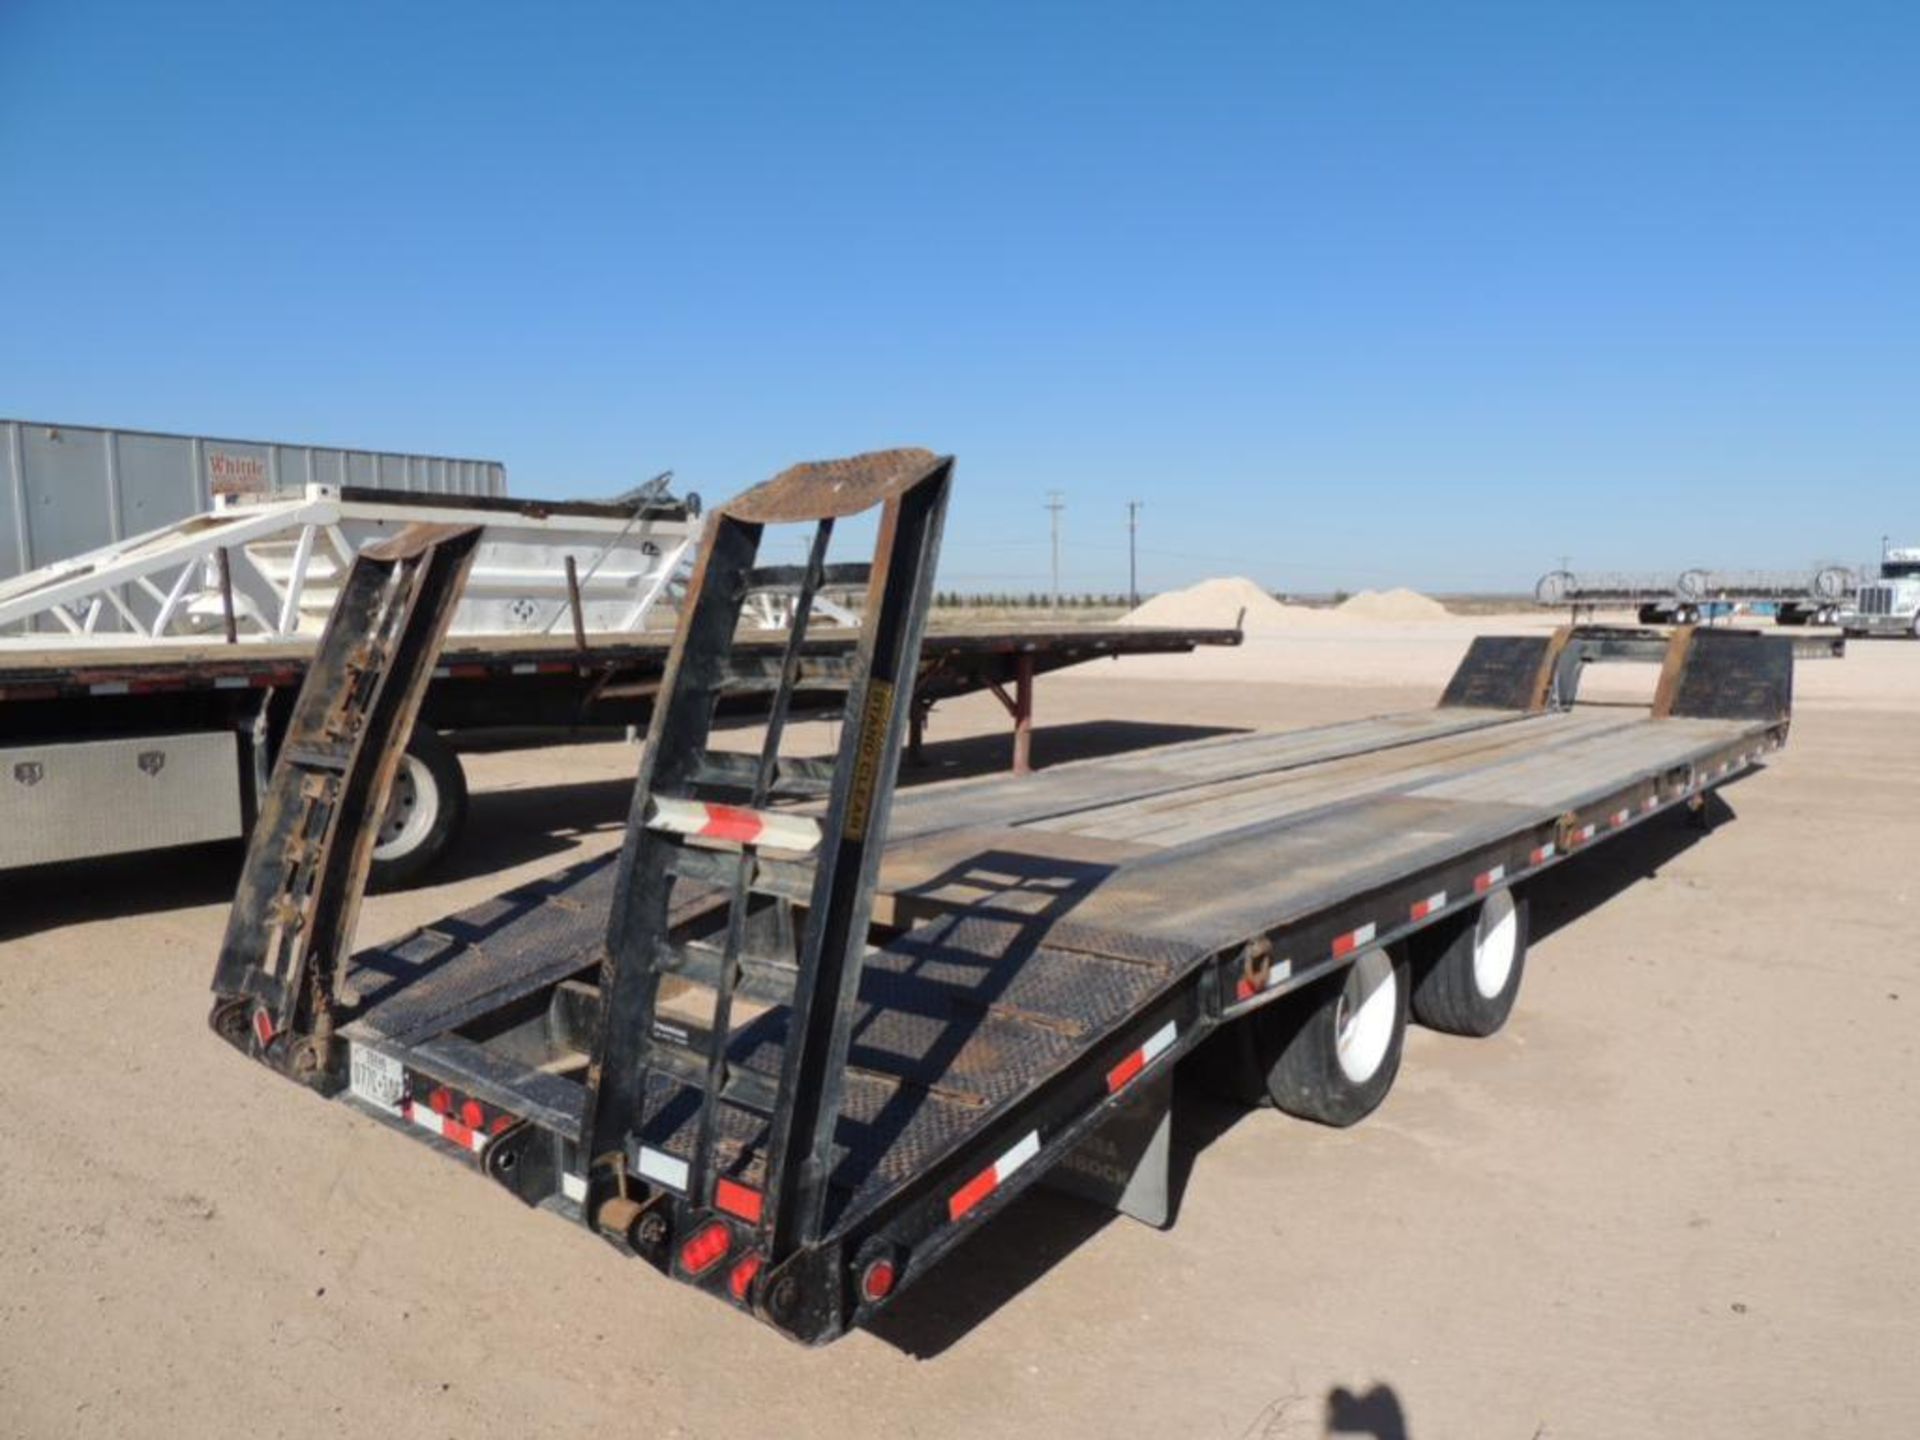 2015 Haulass LB35T T/A Lowboy Trailer, VIN 5JYLB3529FP150838, 60K GVWR, 101 in. x 32 ft. with 5 ft. - Image 3 of 4